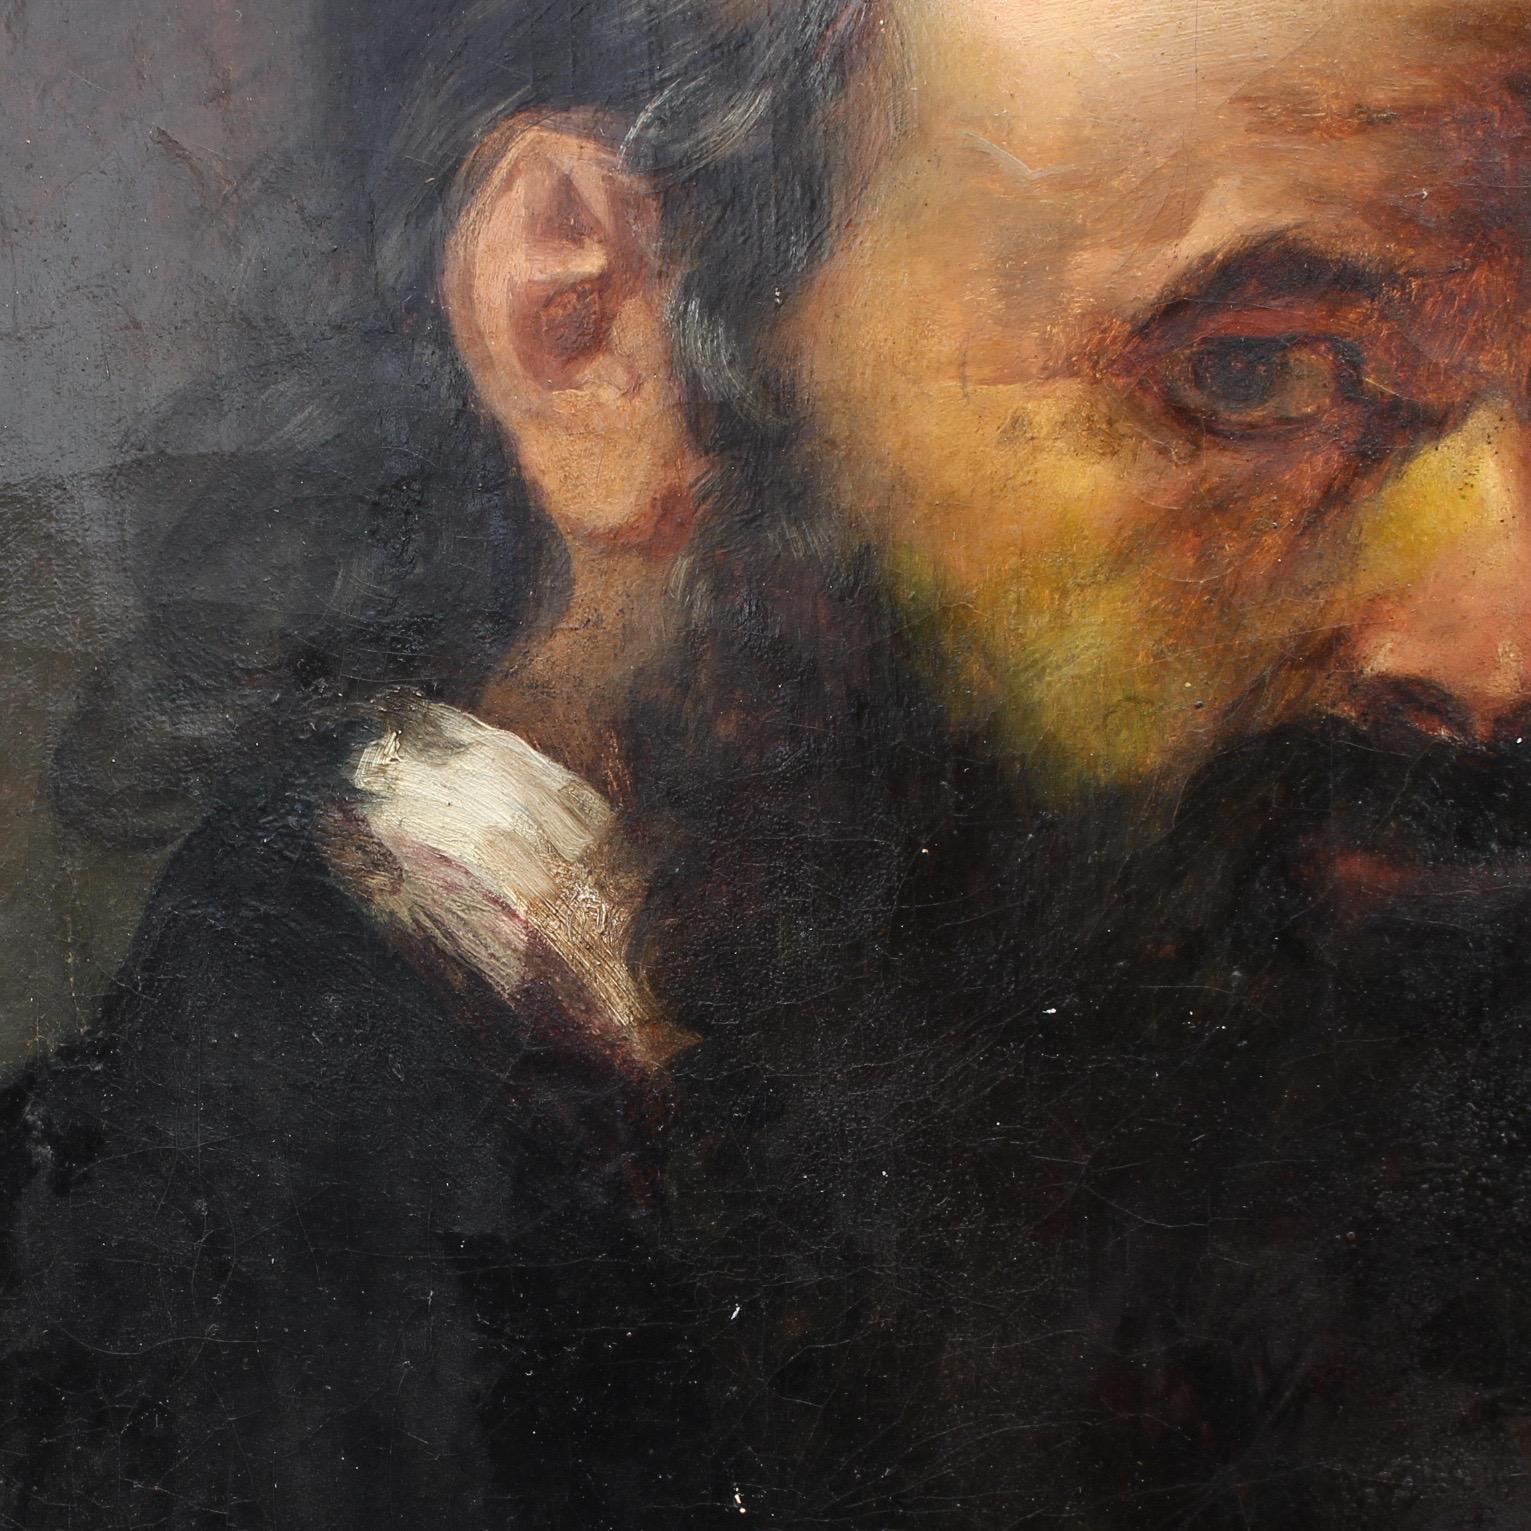 'Portrait of a Man', 19th Century French Oil Painting - Black Portrait Painting by Unknown